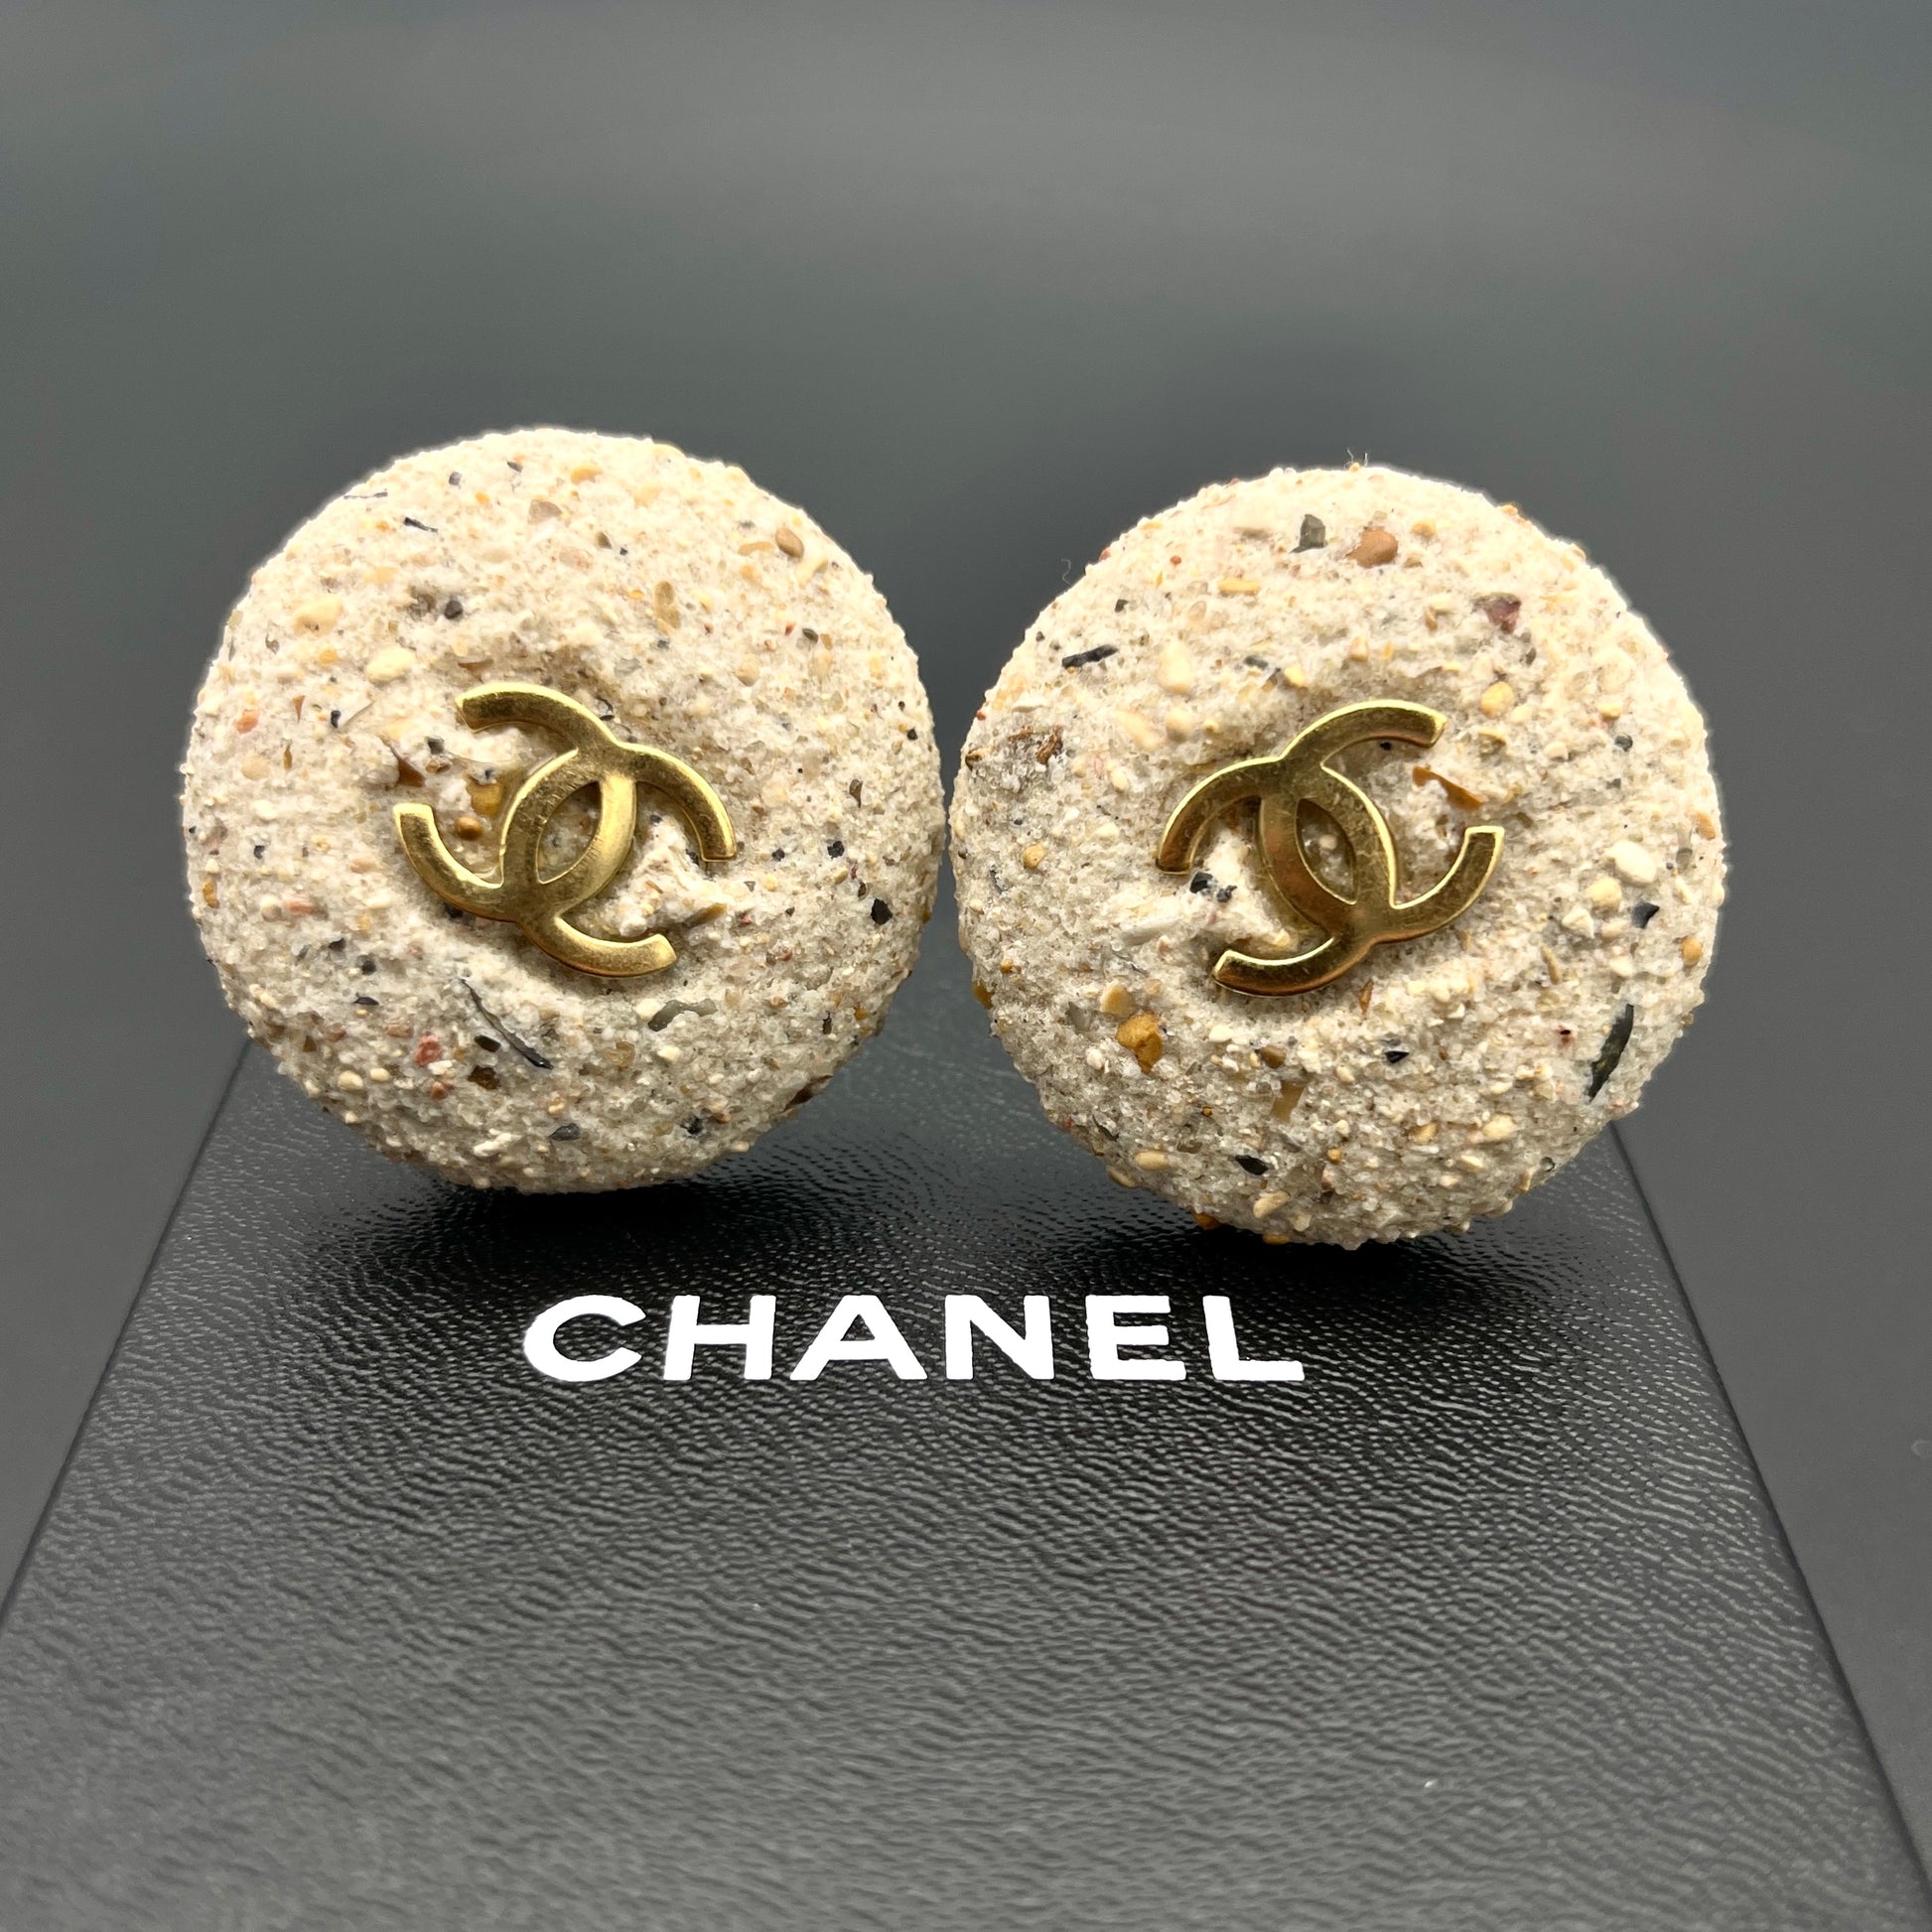 Chanel 95p Vintage Coco Chanel Earrings Black X Gold Cameo Style